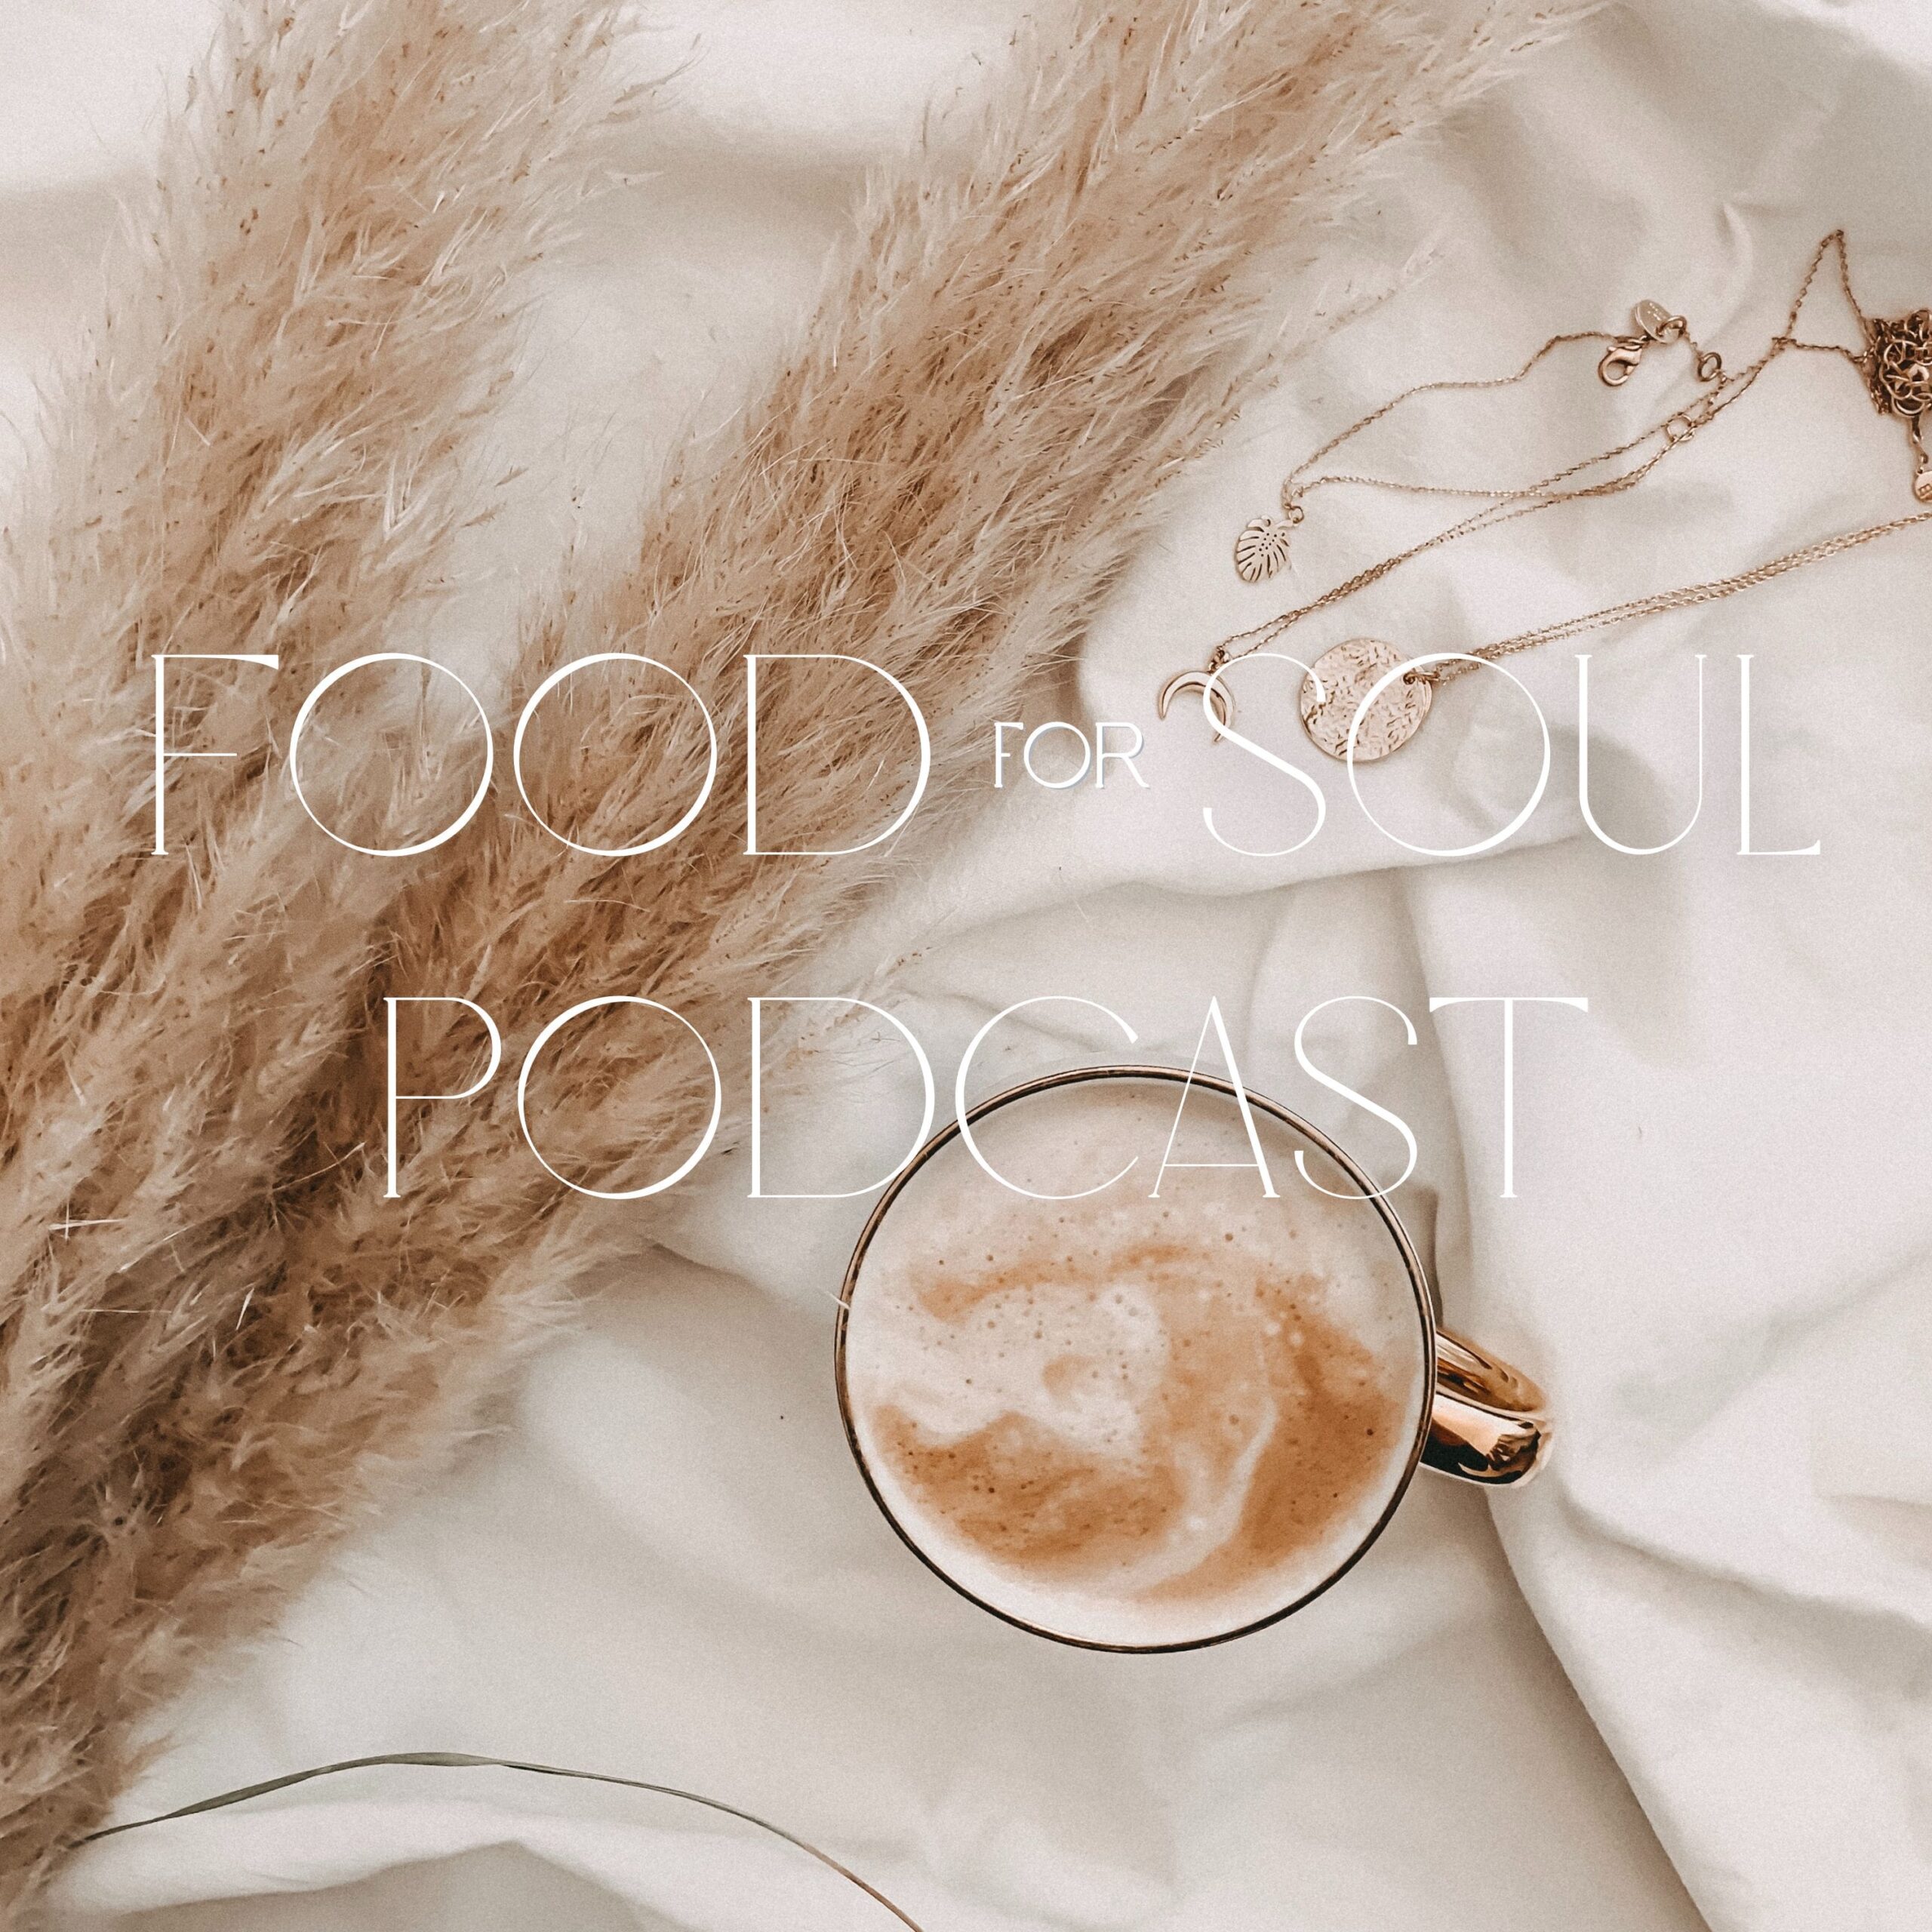 Food for Soul Podcast